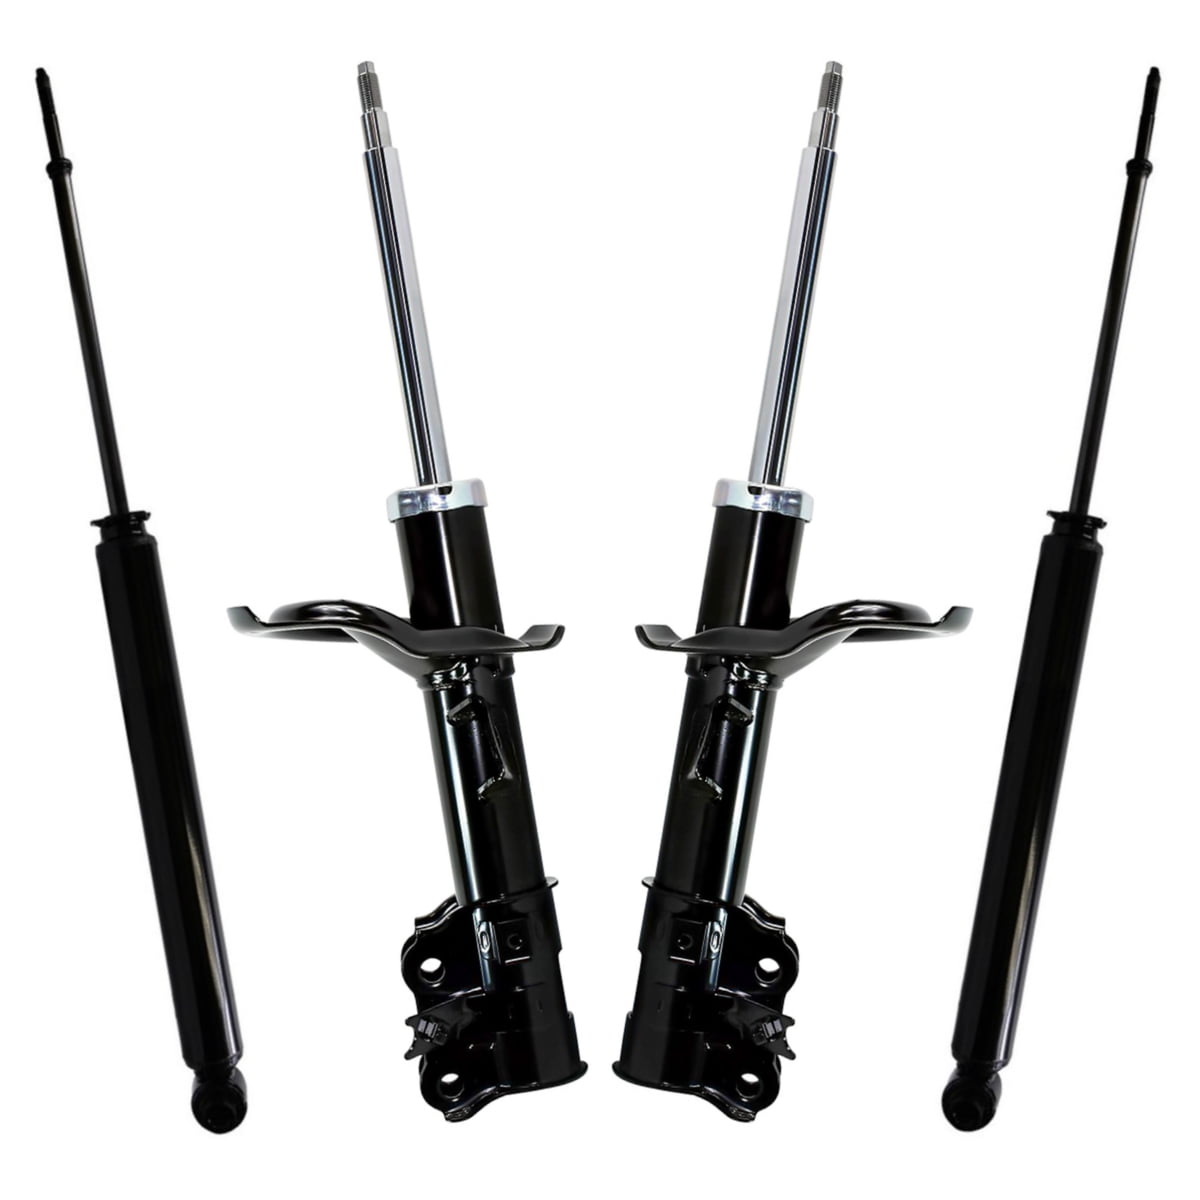 Front Quick Complete Strut Assemblies & Rear Bare Shock Absorbers Compatible with 2003-2007 Nissan Murano Set of 4 